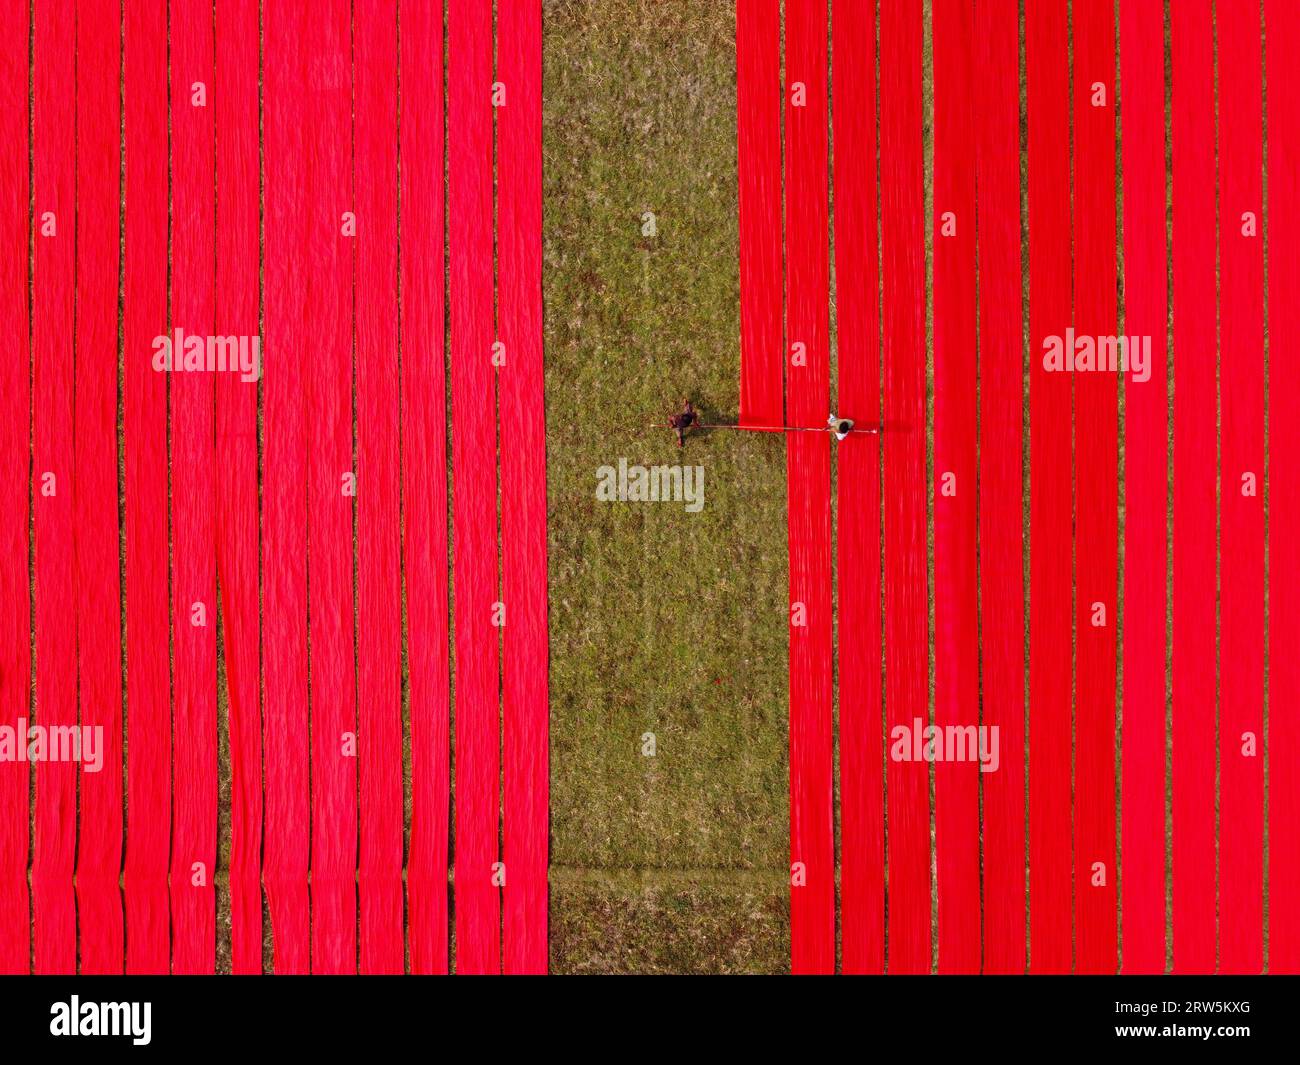 Narsingdi, Bangladesh. 17th Sep, 2023. Hundreds of meters of bright red fabrics are laid out in neat rows across a field in Narsingdi, Bangladesh. Known as 'Lal Shalu' to the locals, the long red cloths are set out to dry under the hot sun, having been dyed with bright red color. The use of sunlight to dry out the fabrics reduces production costs as it is cheaper and more sustainable. The eco-friendly drying method spans an area equal to 5 football fields and takes up to 6 hours to complete after being placed by workers at sunrise. Credit: Joy Saha/Alamy Live News Stock Photo